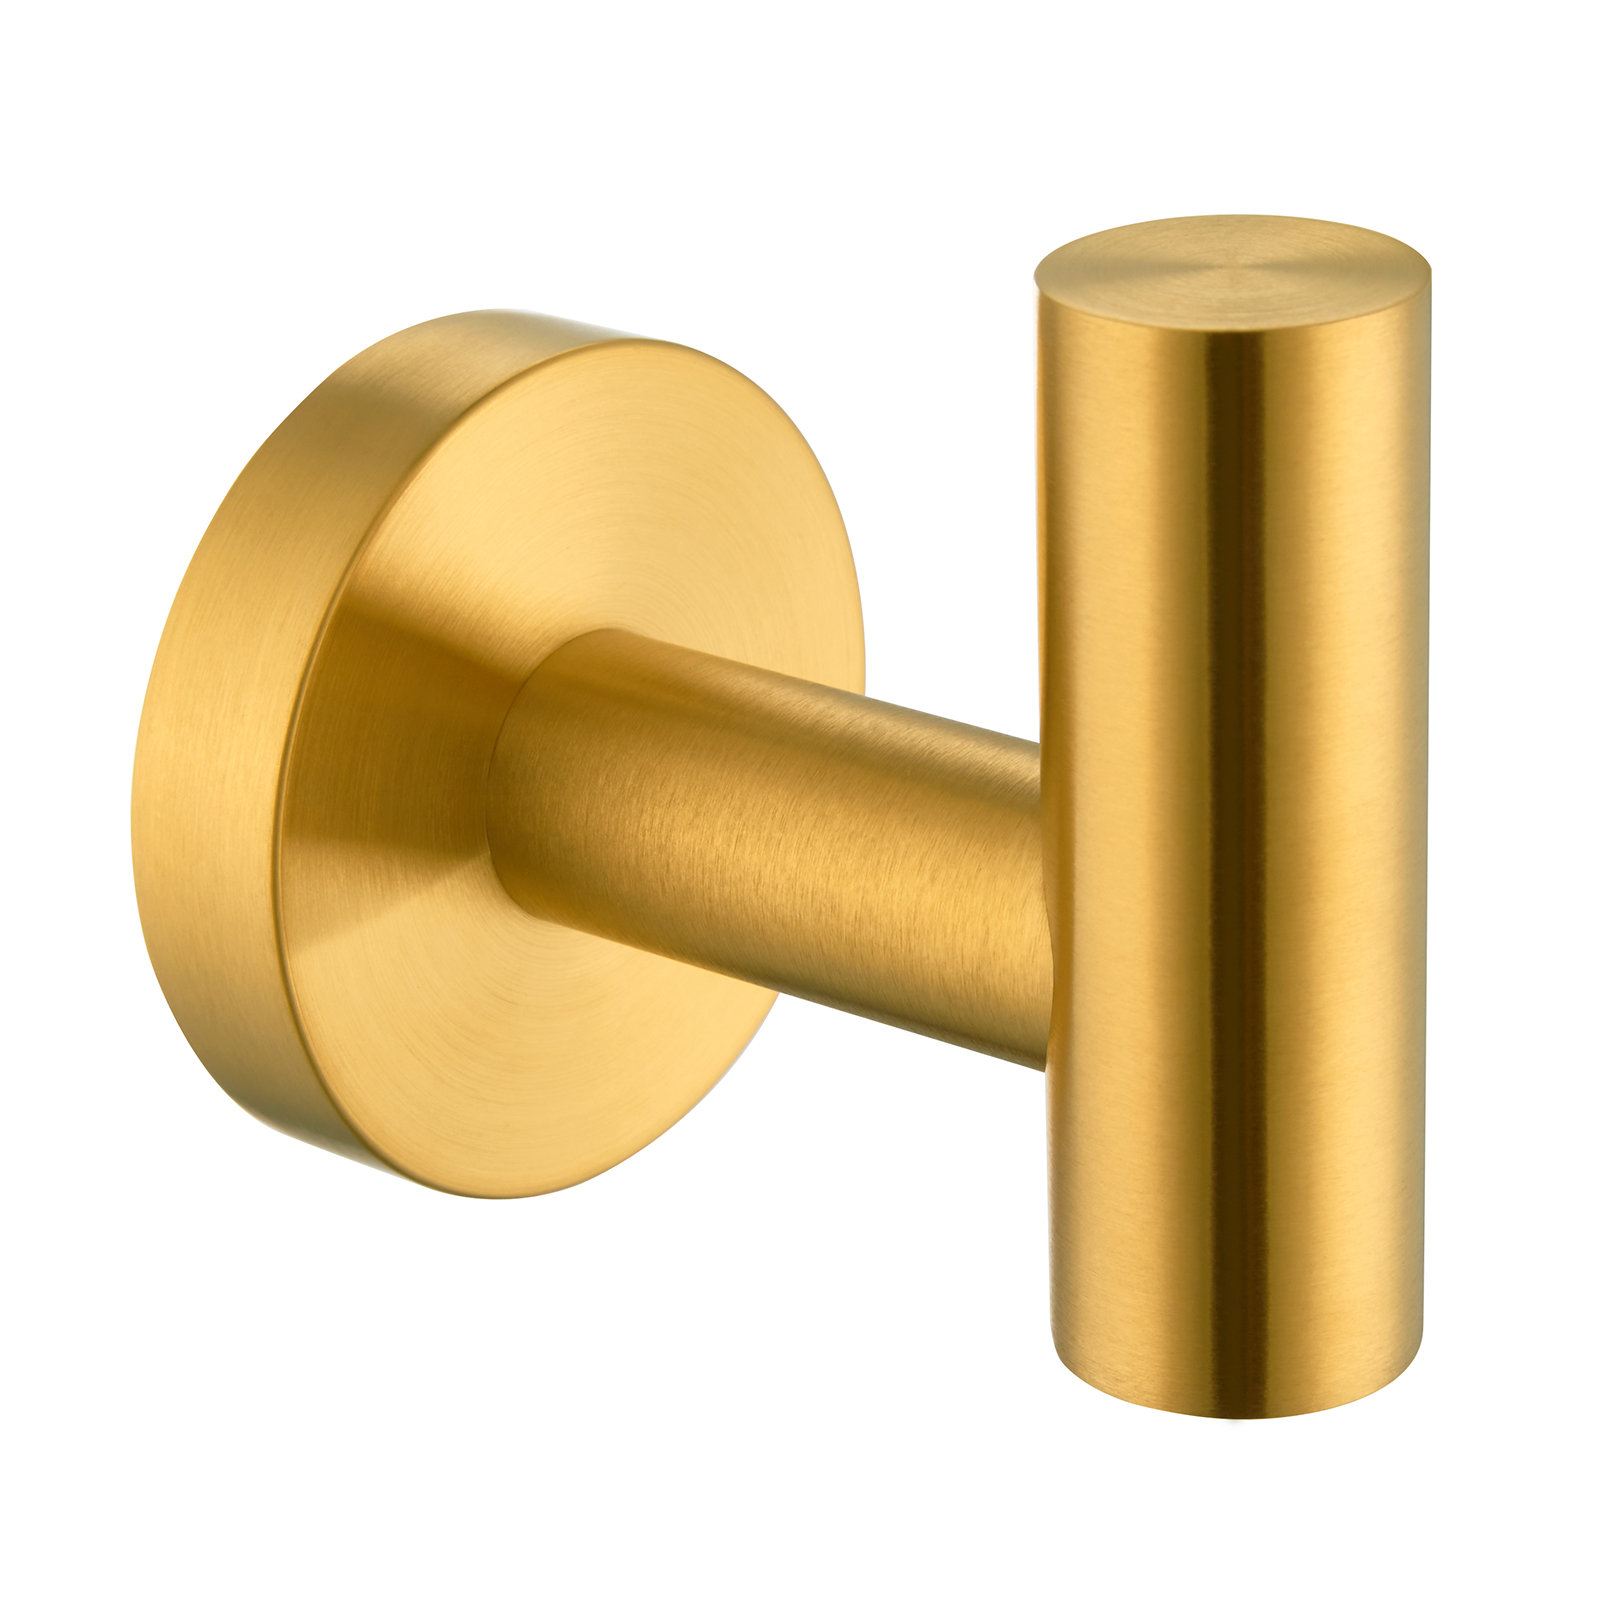 AngleSimple AF084 Wall Mounted Towel Hook Finish: Brushed Gold